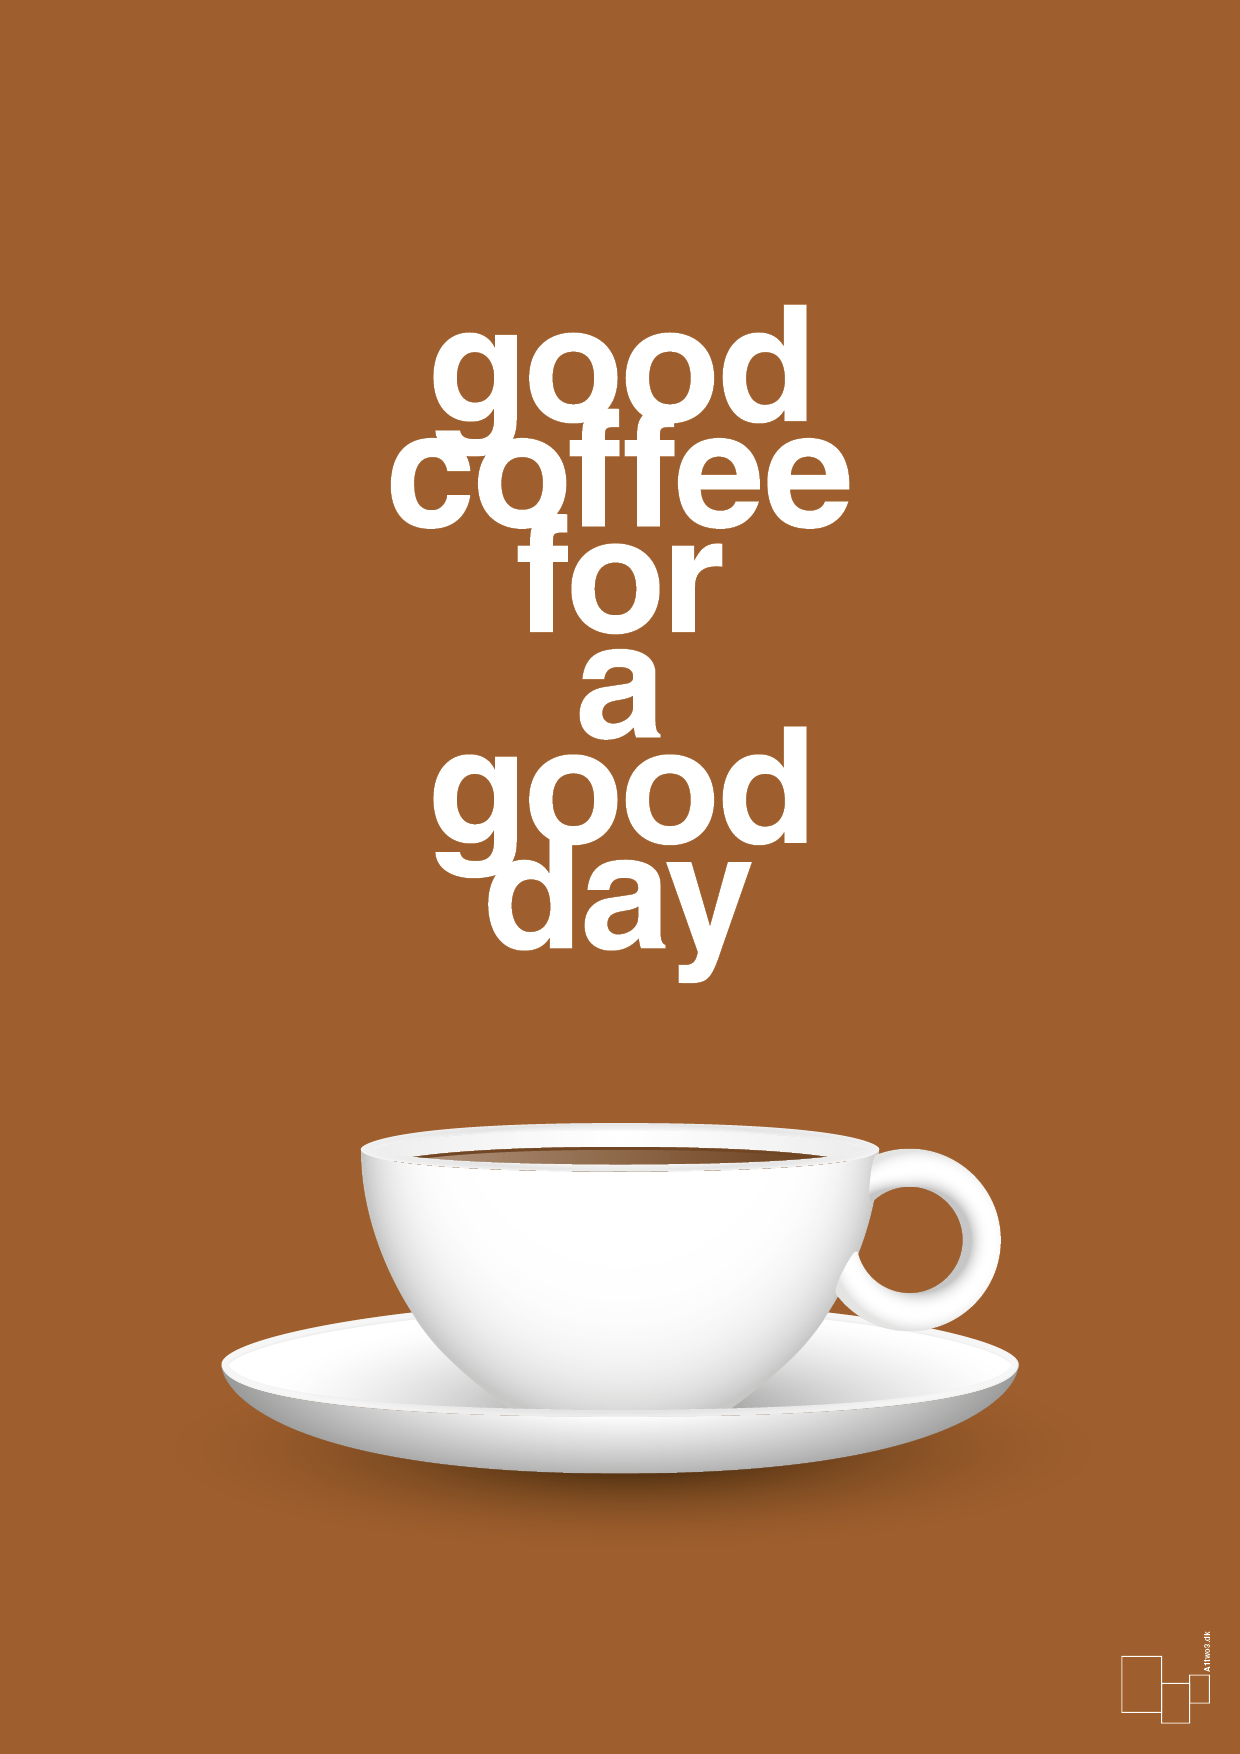 good coffee for a good day - Plakat med Mad & Drikke i Cognac